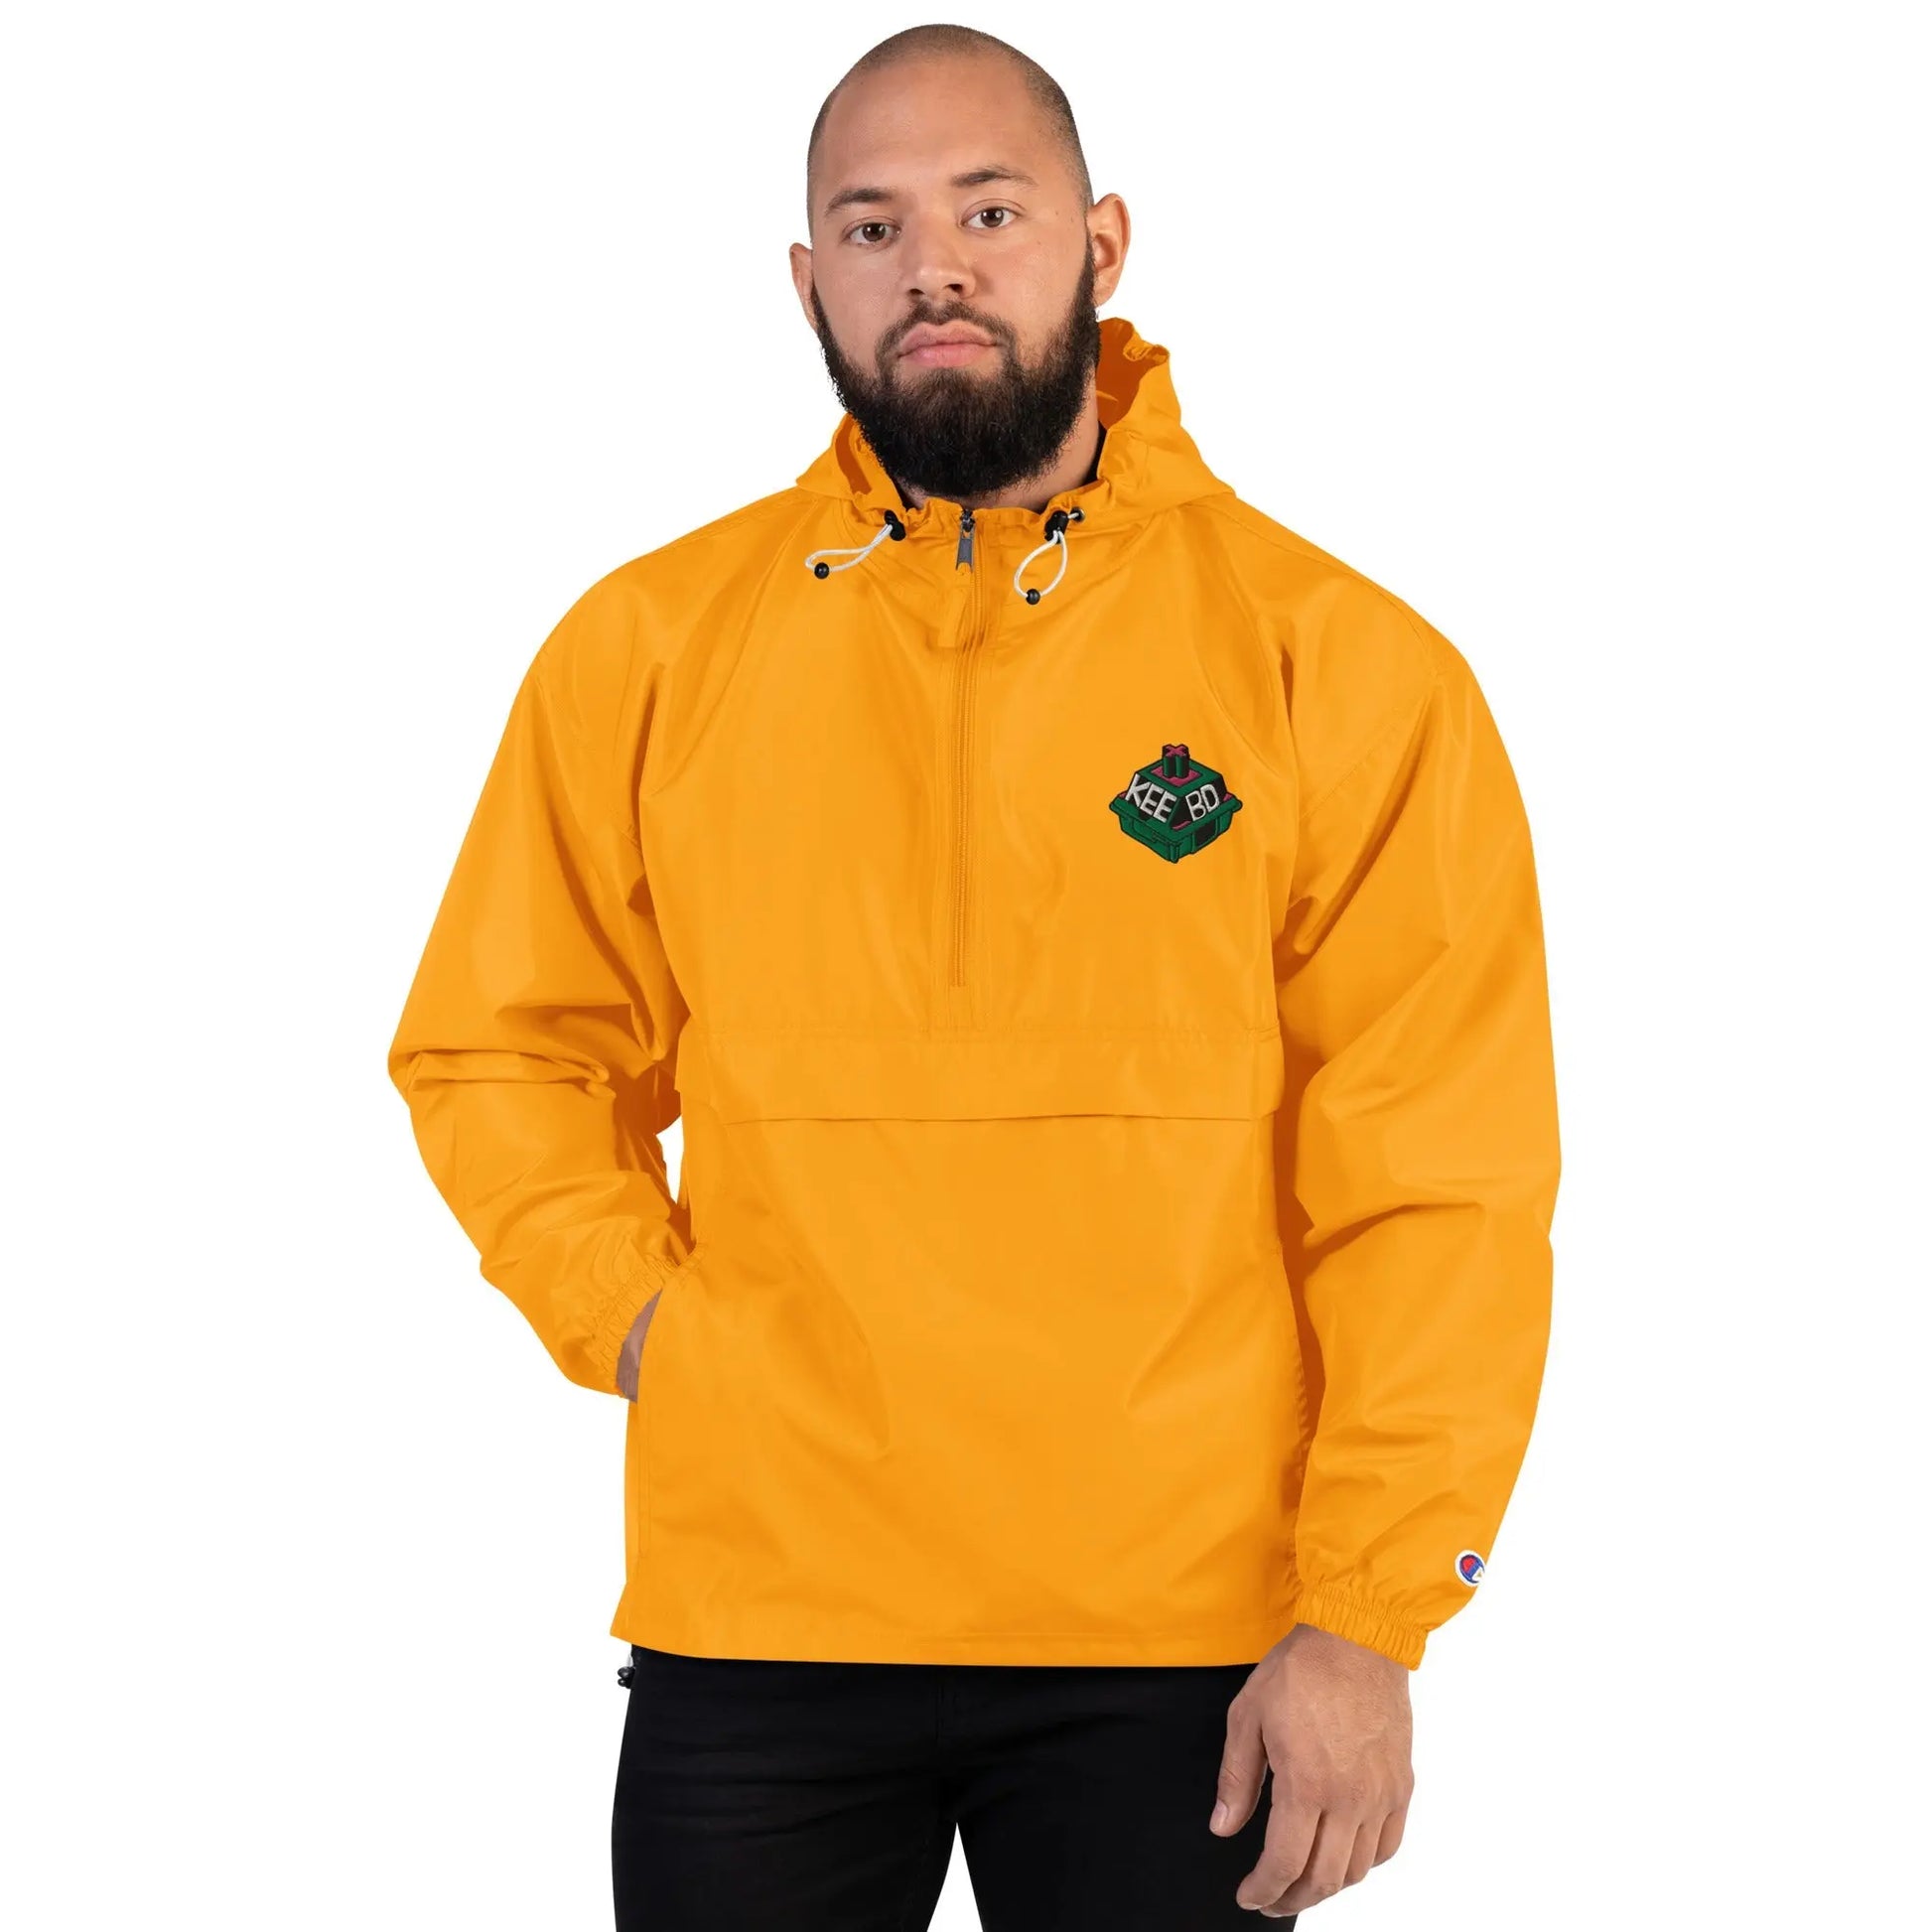 Embroidered Champion Packable Jacket KEEBD